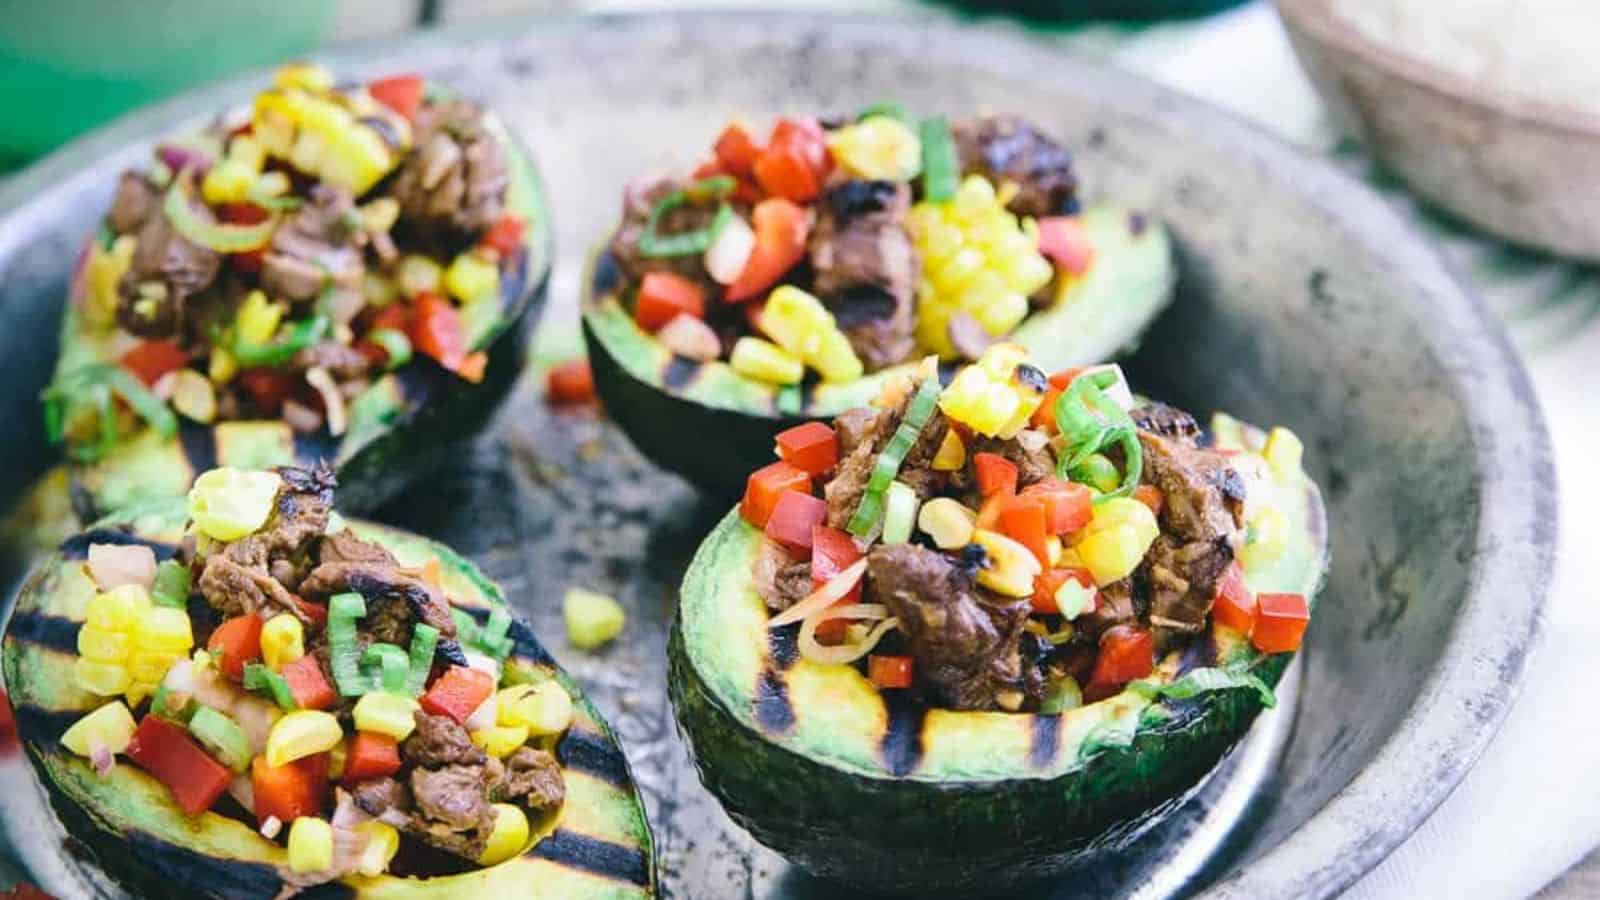 Close-up image of asian steak stuffed grilled avocados on a plate.